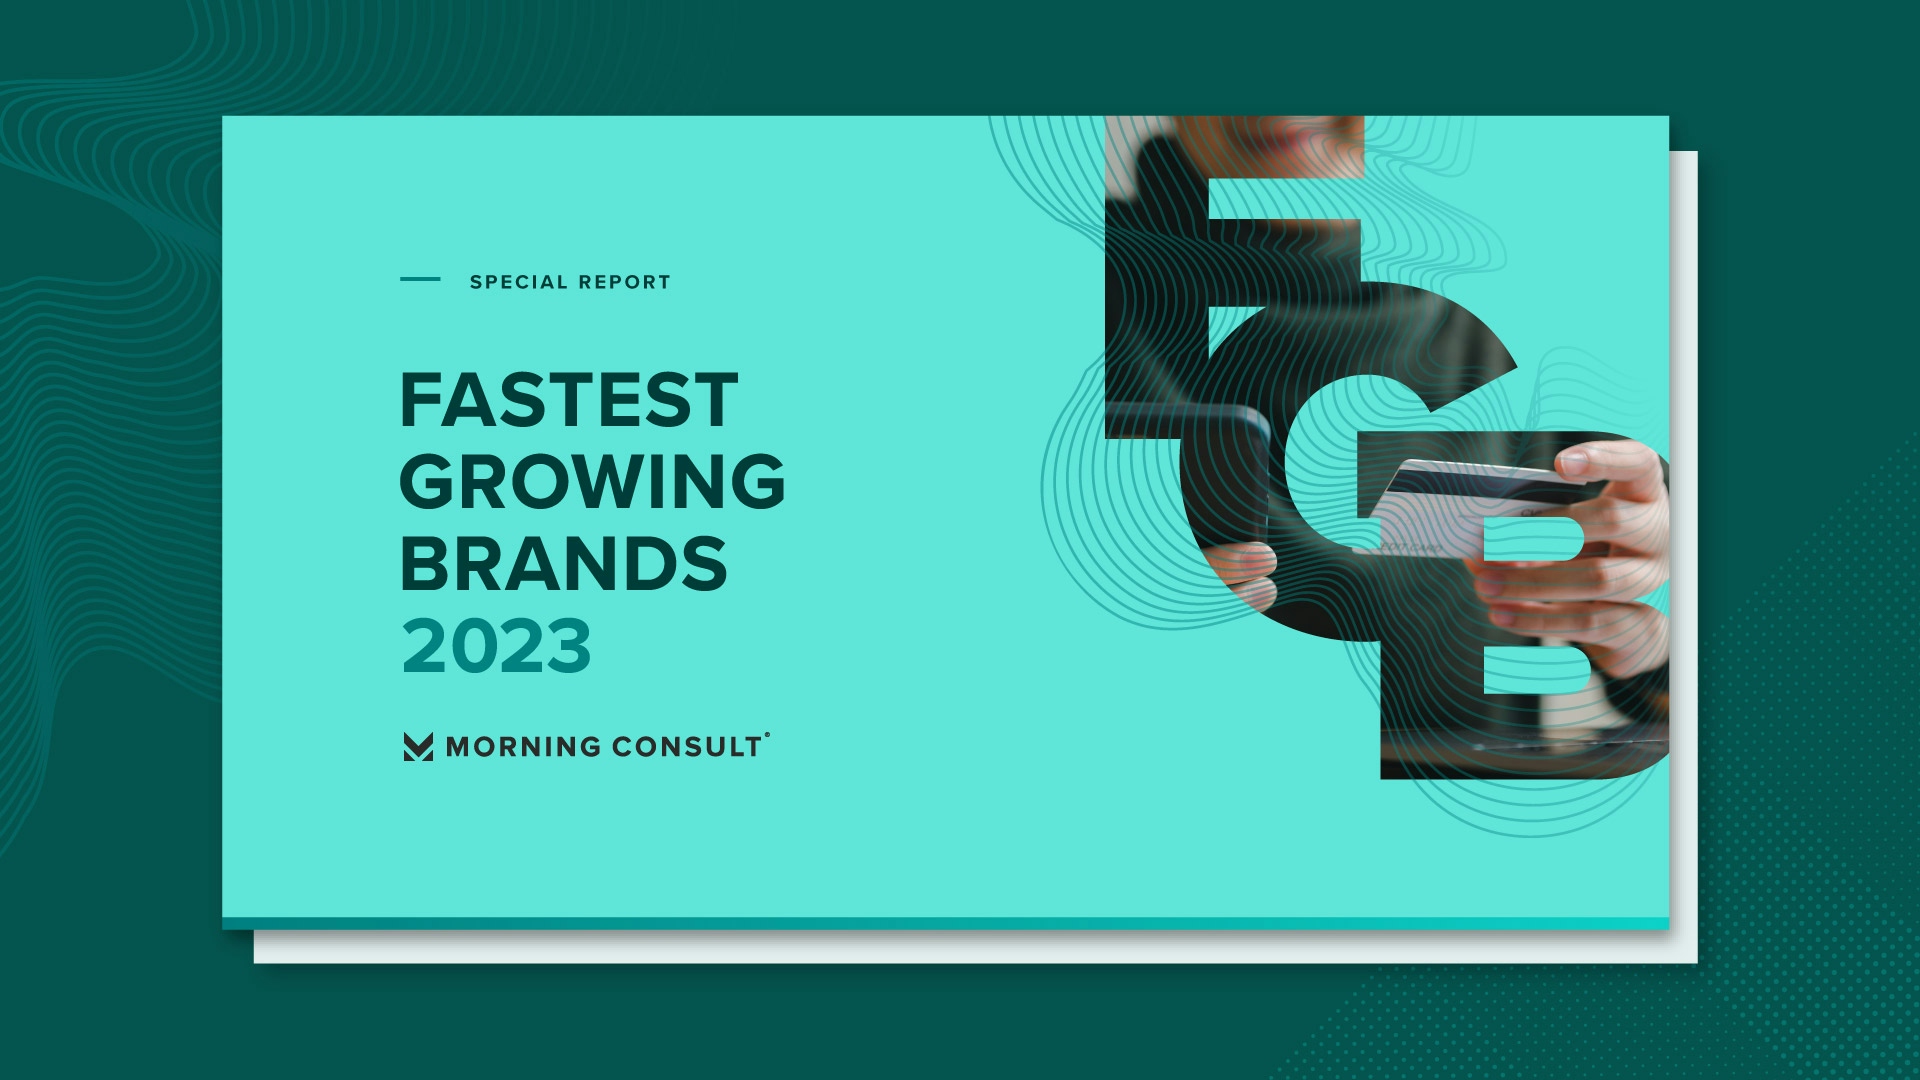 Download the Fastest Growing Brands Report 2023